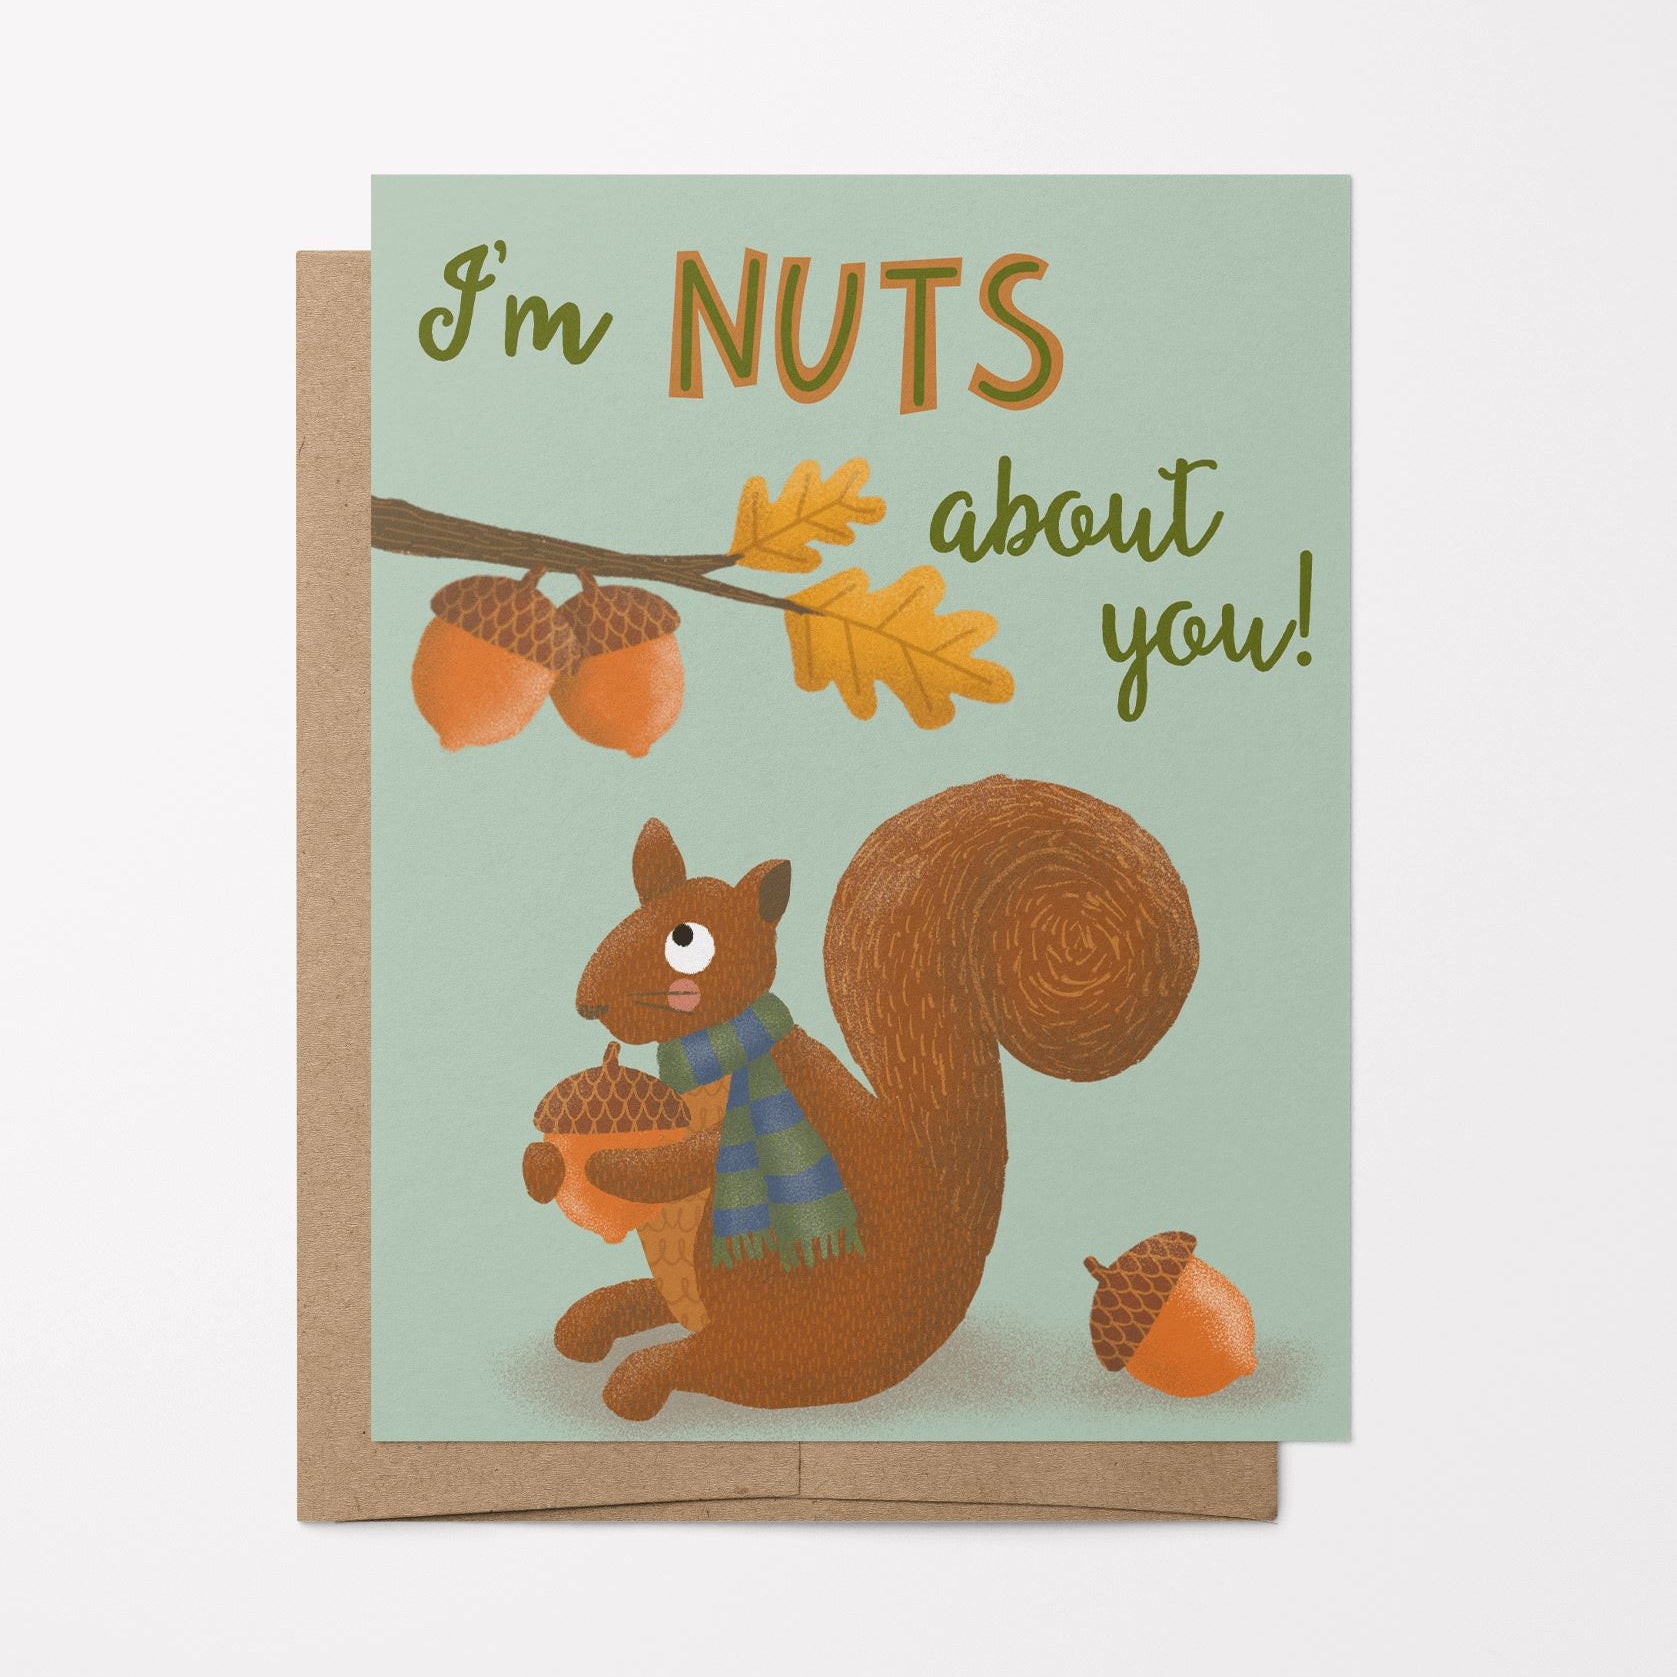 A photo of greeting card and brown kraft envelope featuring a hand-drawn illustration of a cute squirrel with a scarf on holding an acorn looking at a branch with acorns and the phrase, "I'm nuts about you!"